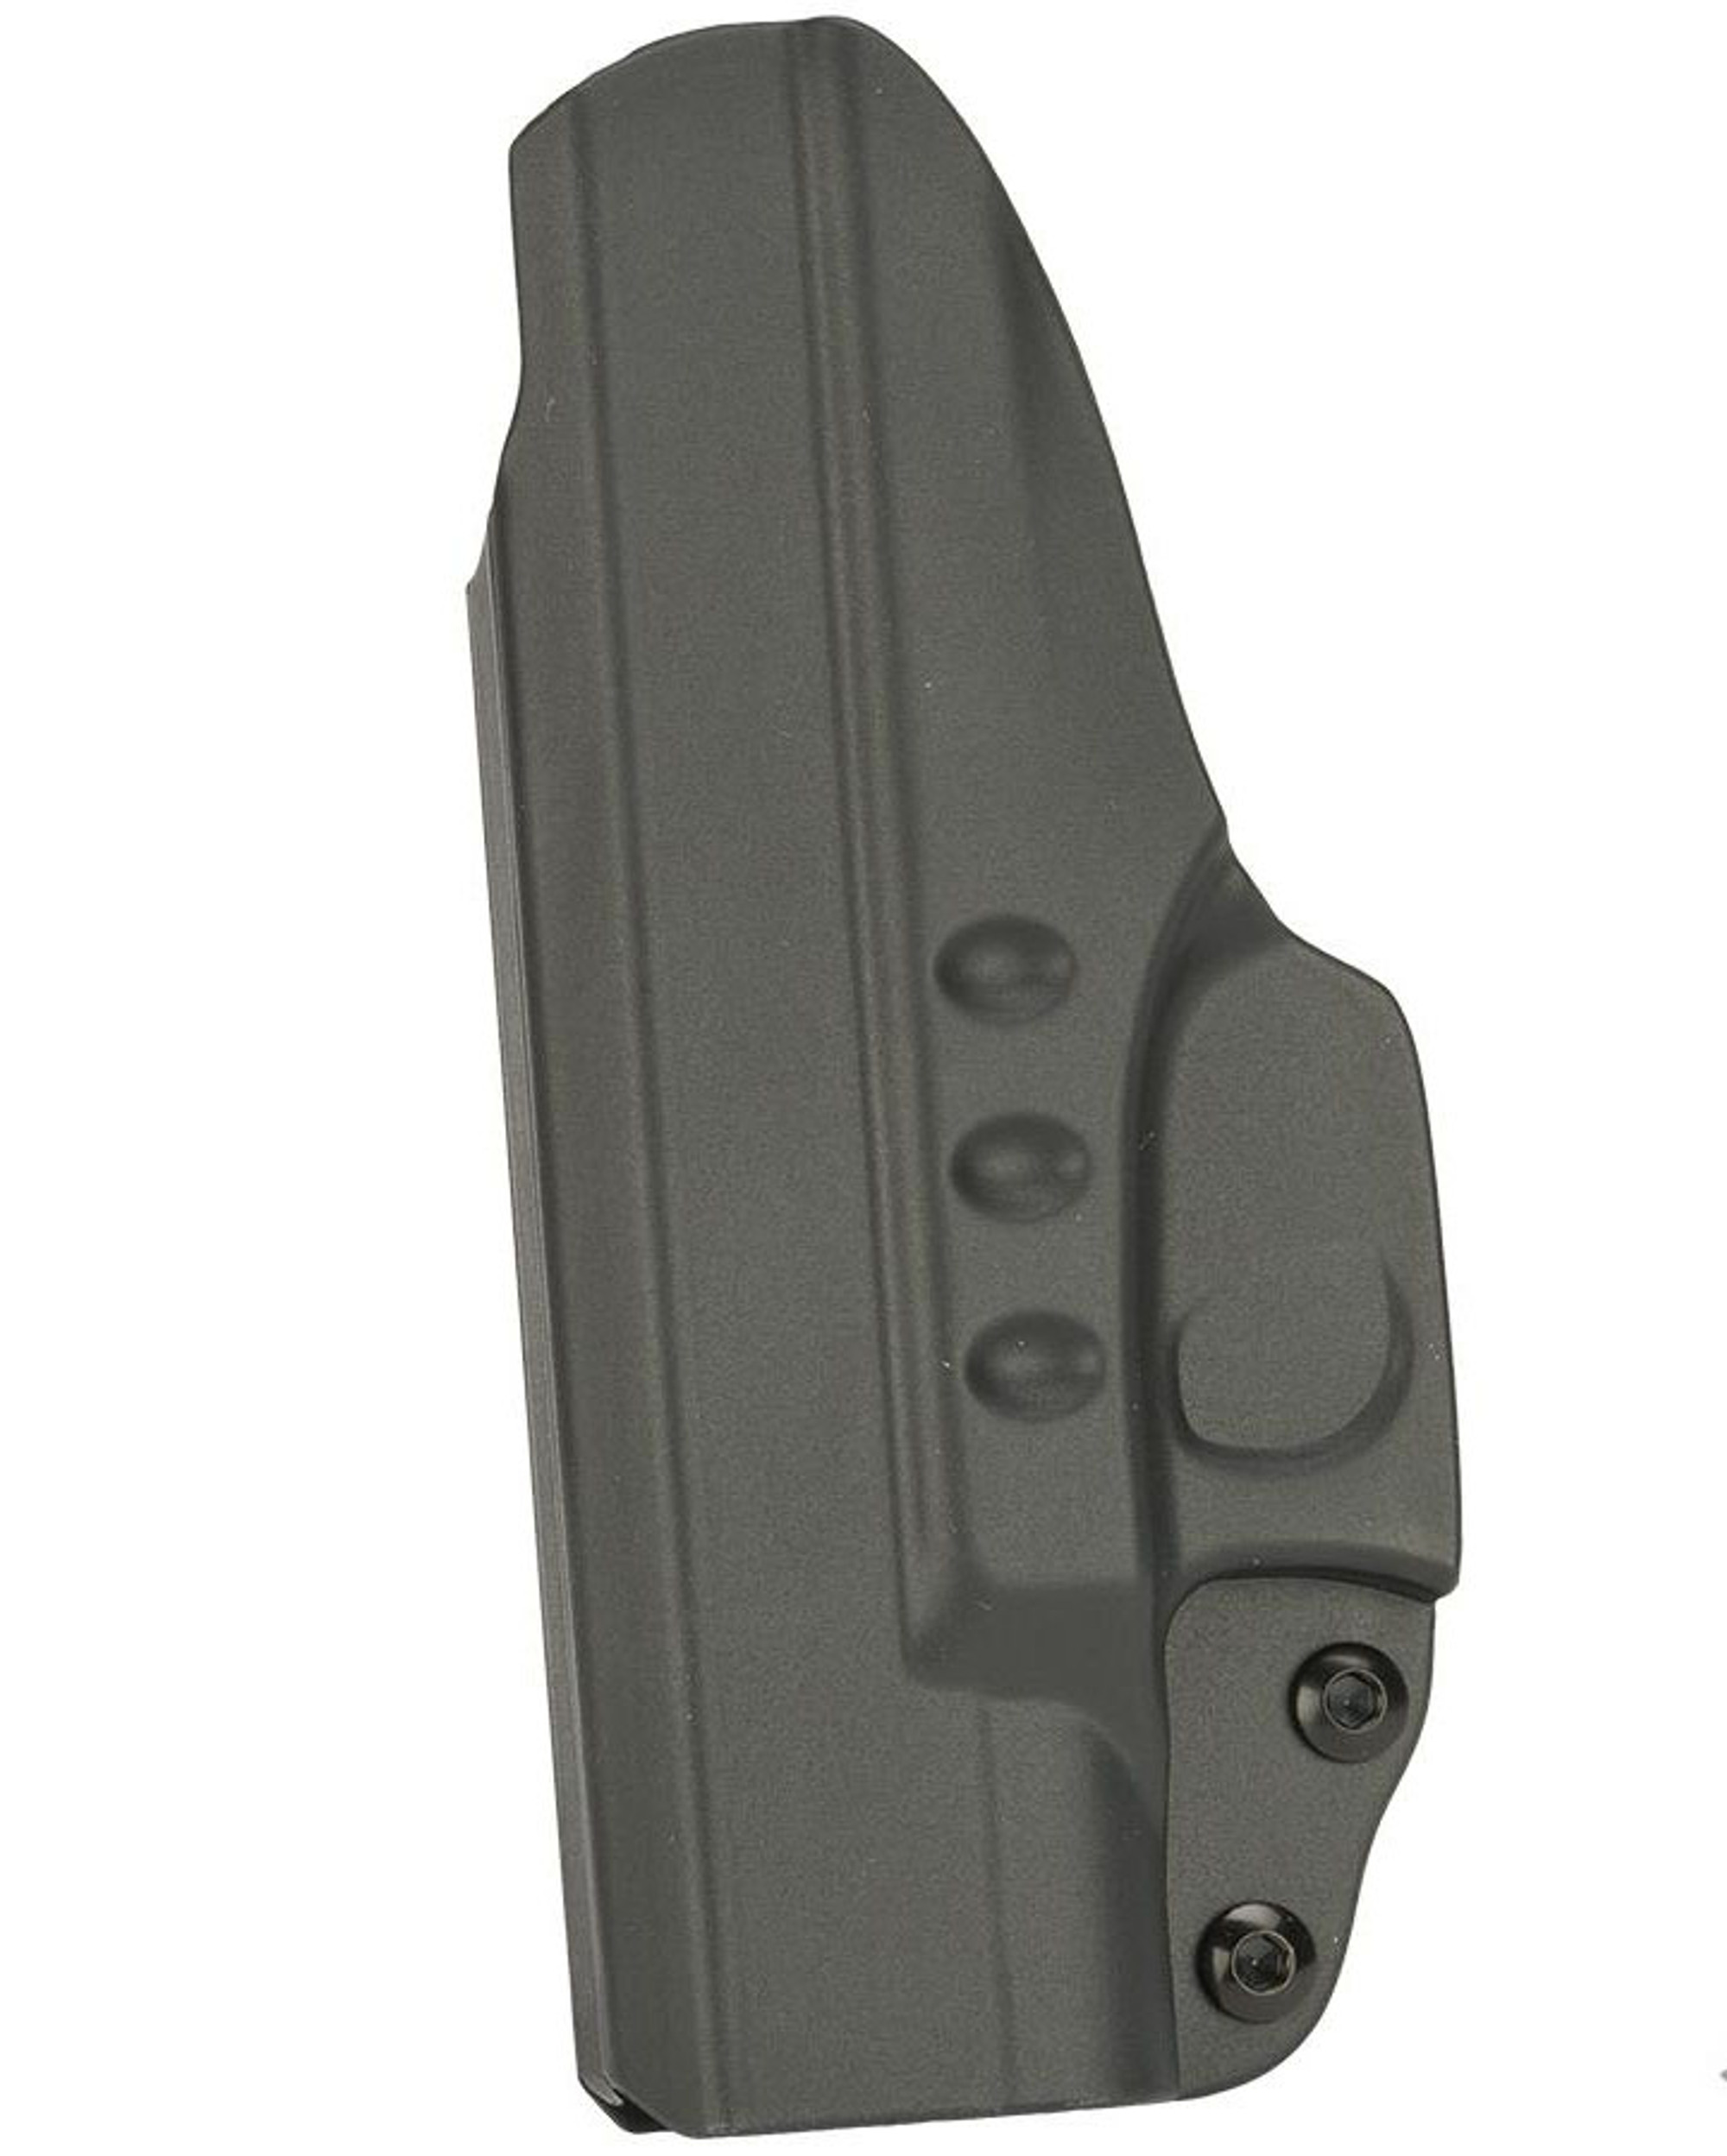 CYTAC In Waist Band Molded Holster (Model: Glock 26/27/33)